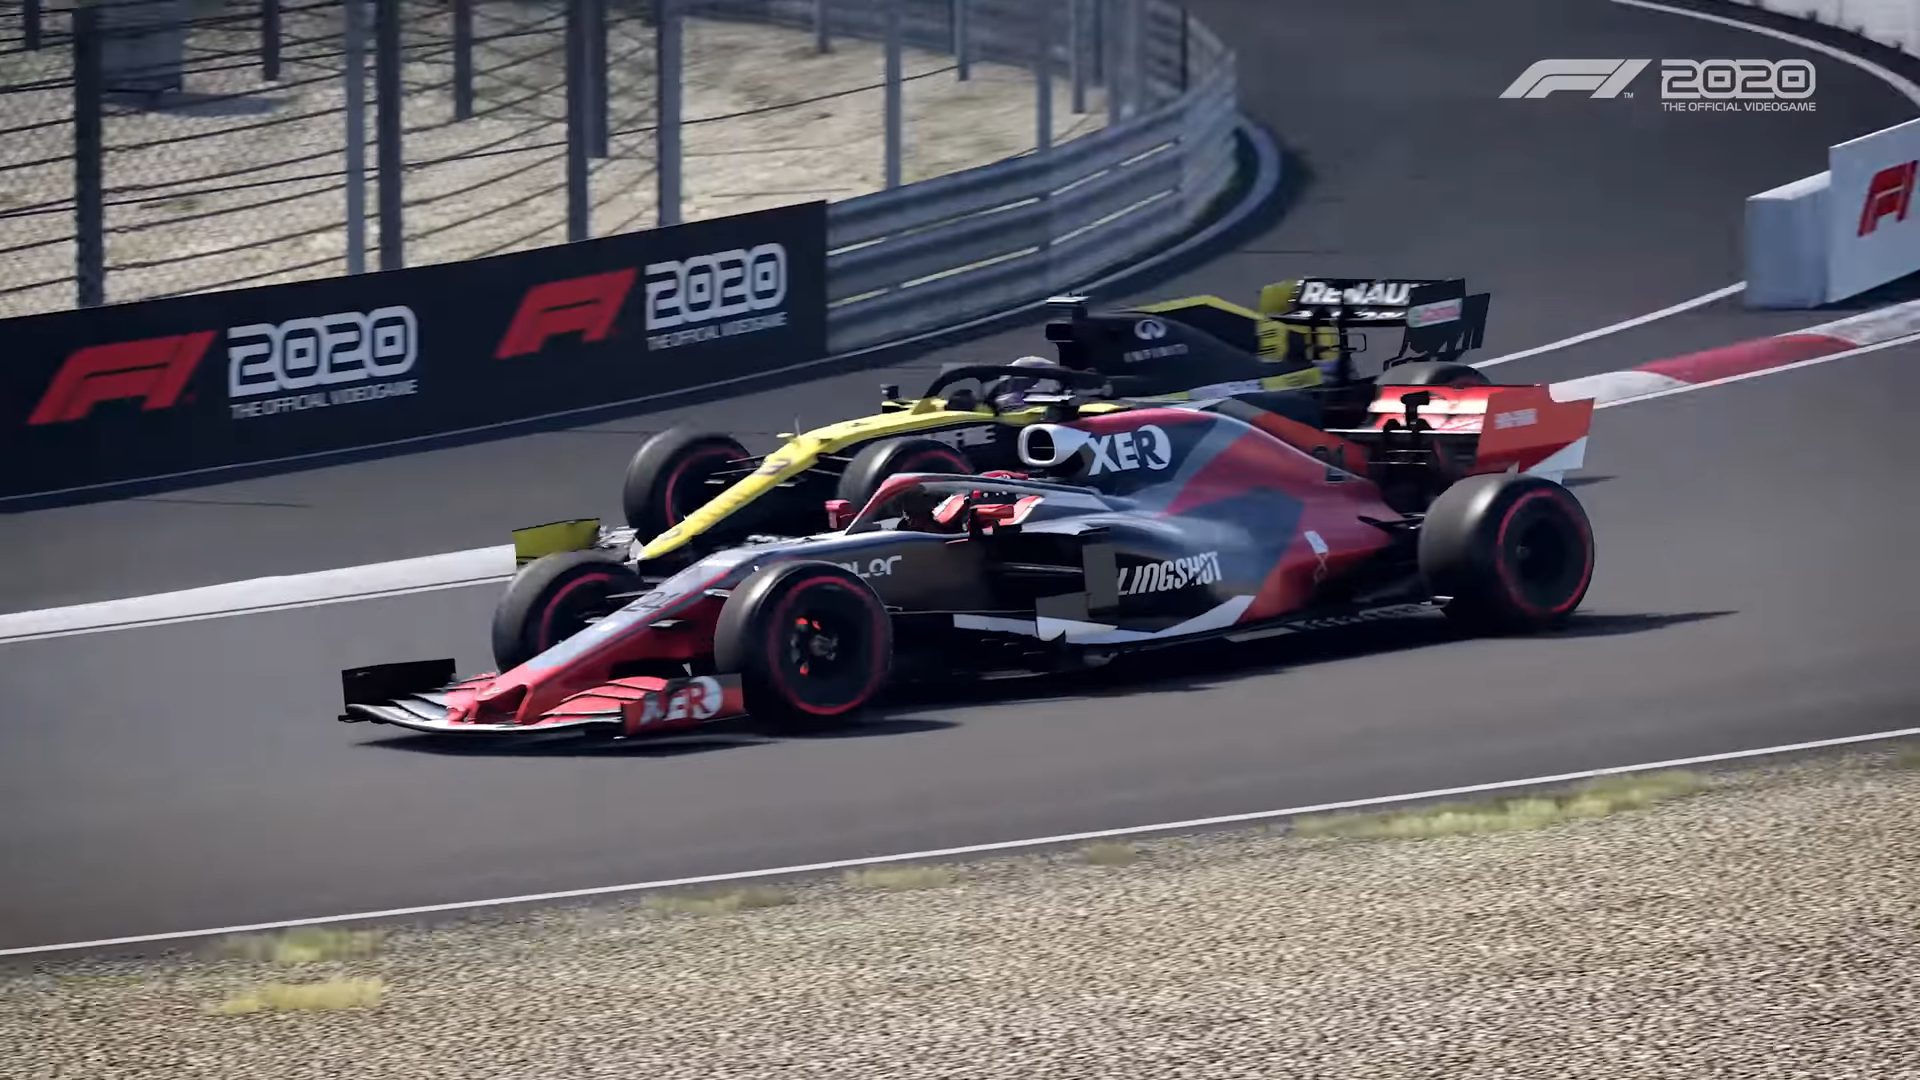  How to customize your team logo in F1 2020 